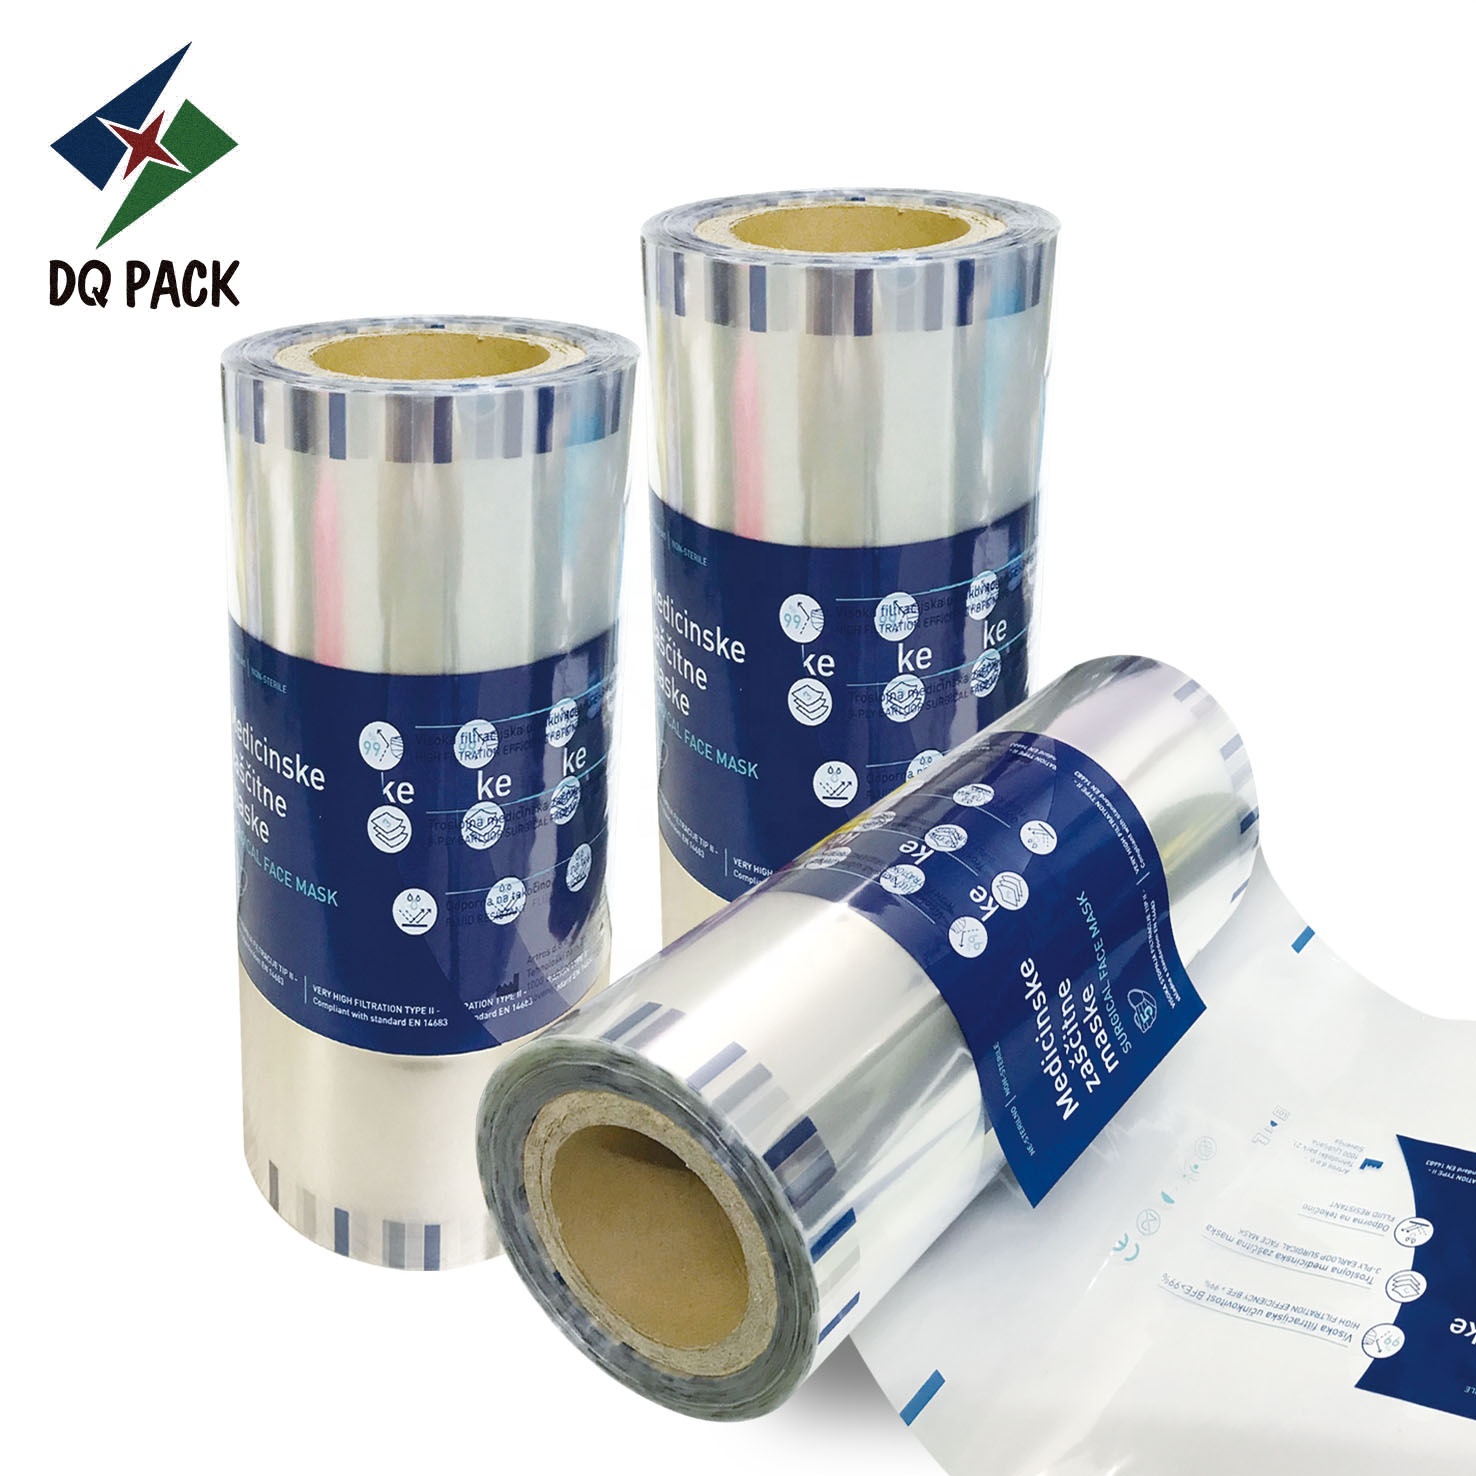 DQ PACK New Arrival Heat Seal BOPP Other Packaging Materials For Mask Packing Machine